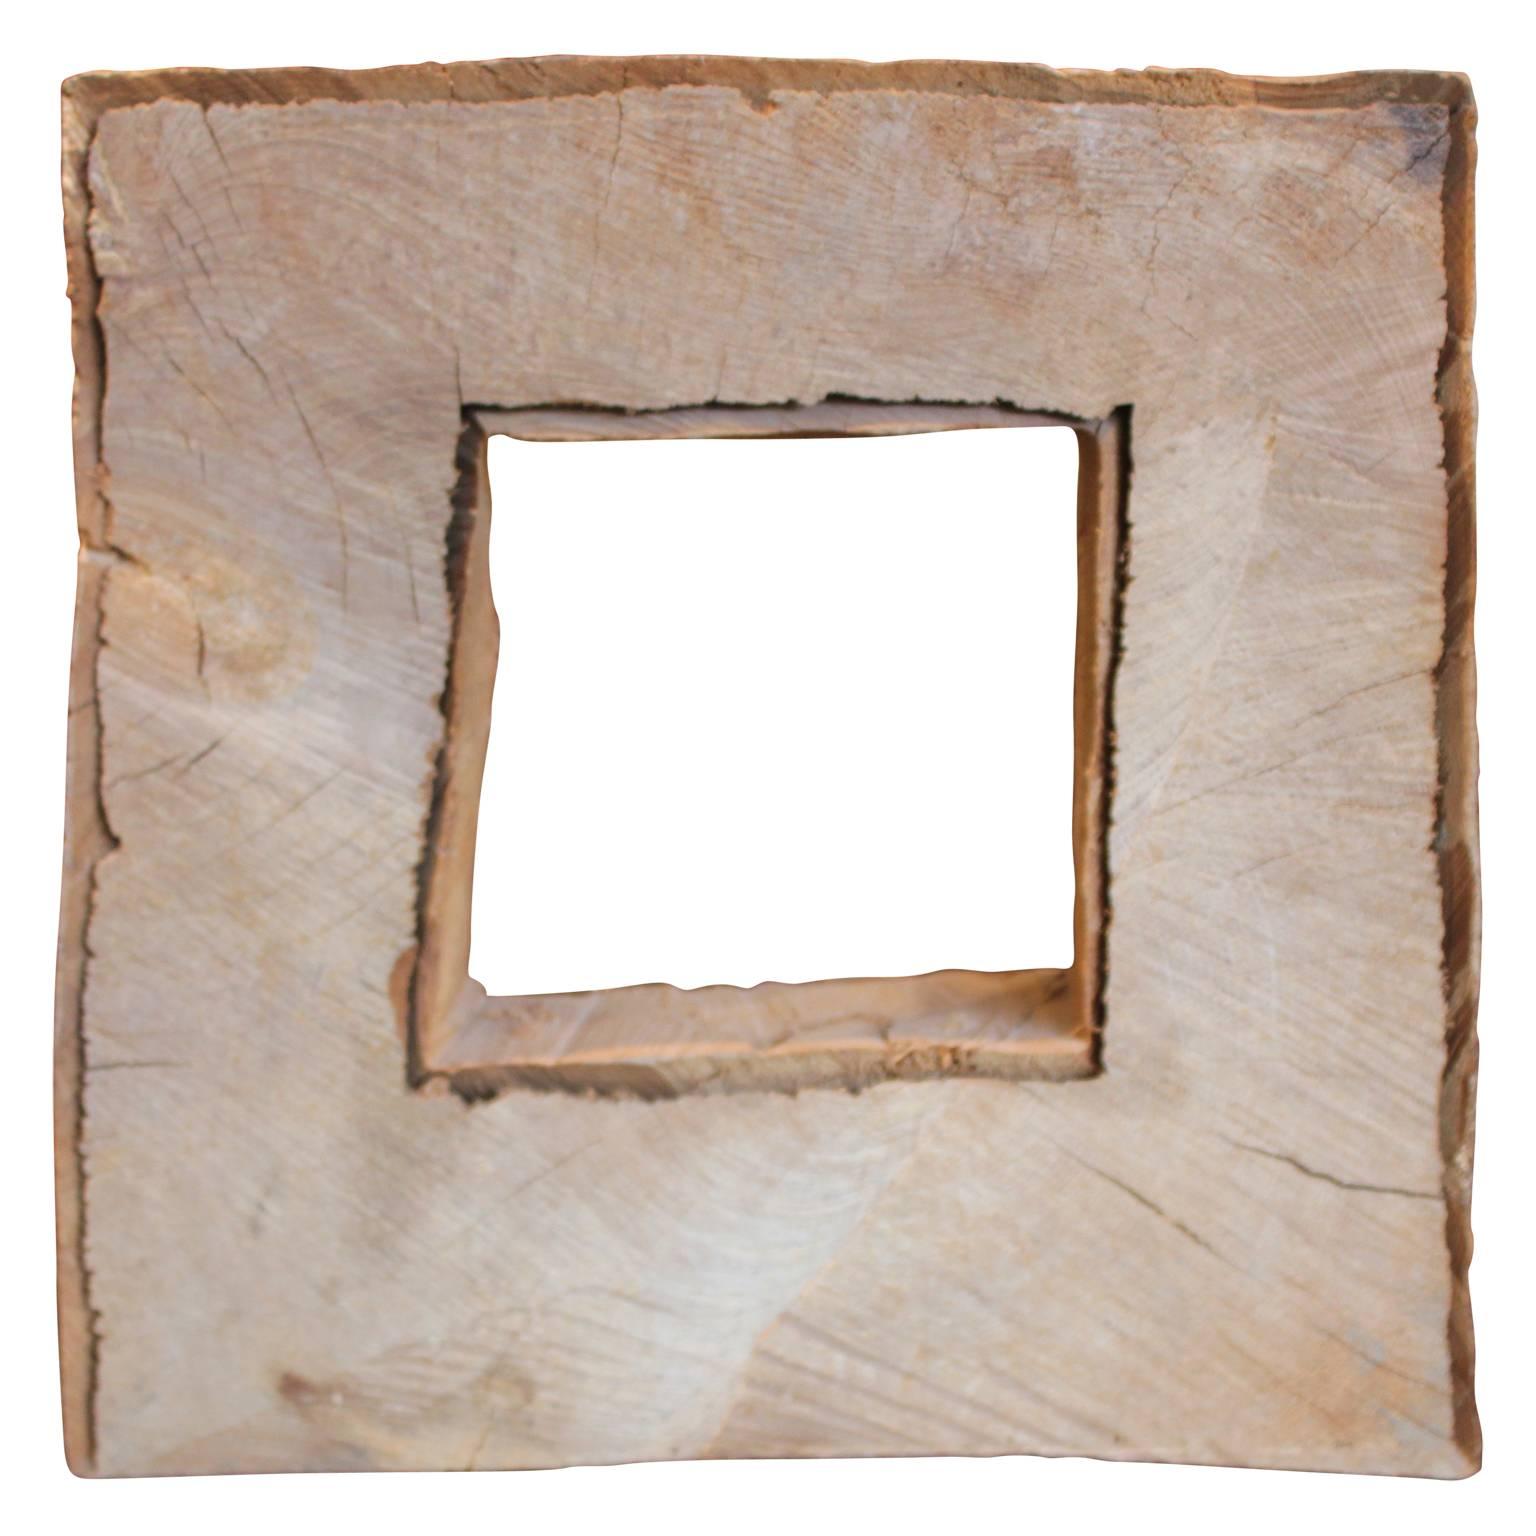 Square Wood Window Sculpture - Brown Abstract Sculpture by David Nash